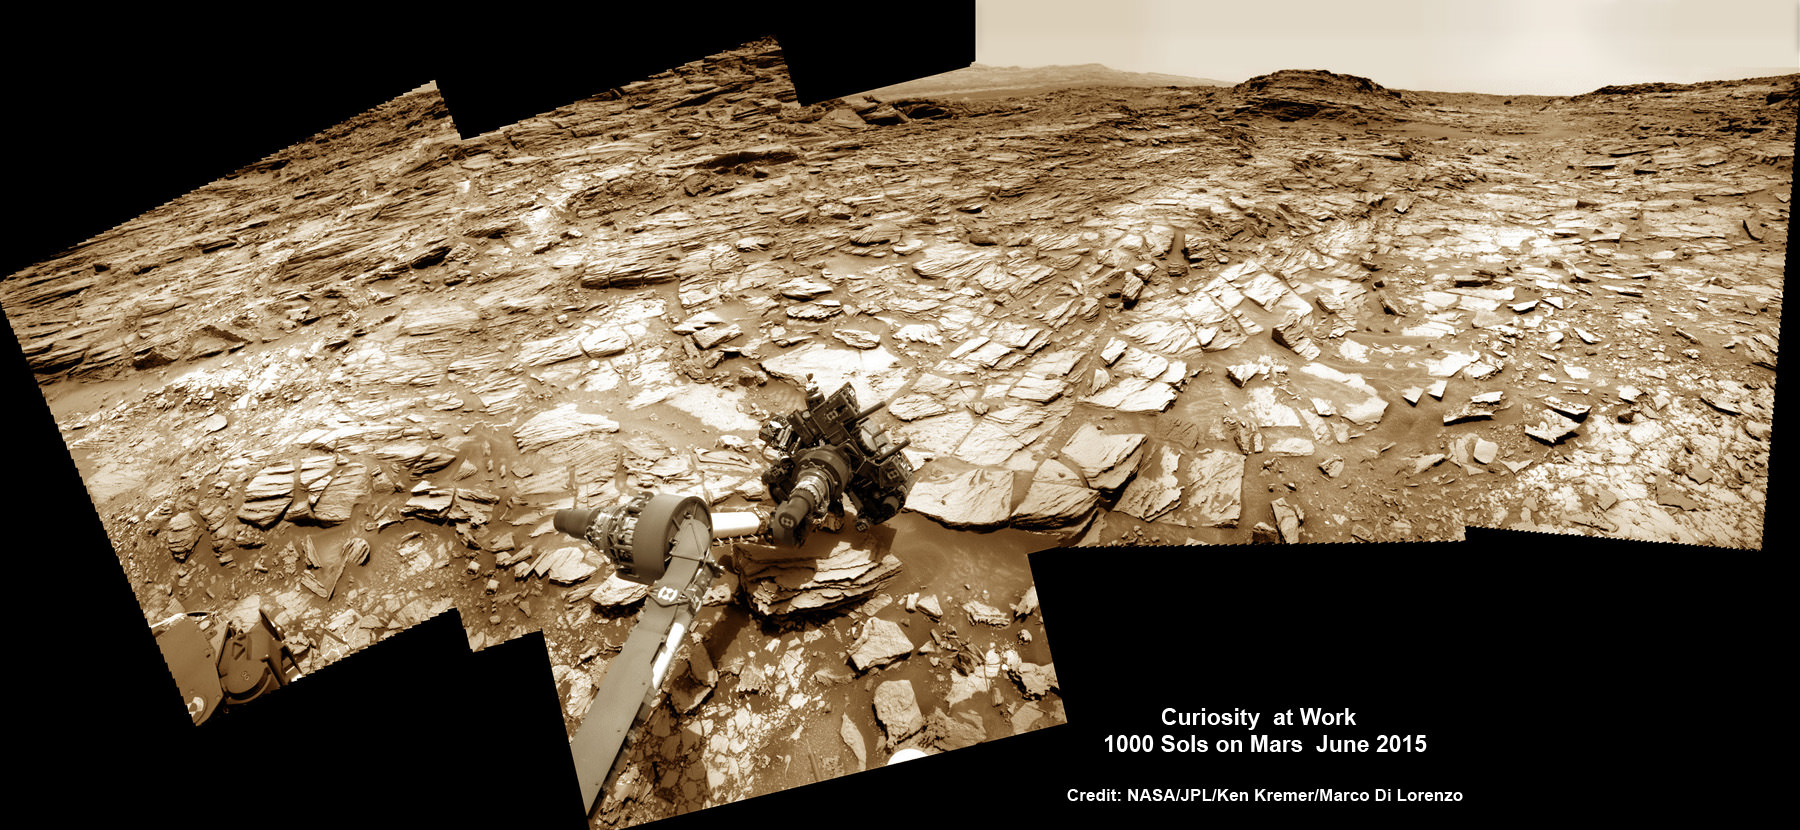 Curiosity rover at work for 1000 Sols on Mars.  This composite multi sol photo mosaic shows outstretched robotic arm inspecting intriguing rock outcrops.   The APXS spectrometer is investigating a target called ‘Ronan’ on the Stimson overlying outcrop.   Navcam camera raw images taken from sols 997 to 1000 are stitched and colorized.  Credit: NASA/JPL/Ken Kremer/kenkremer.com/Marco Di Lorenzo   